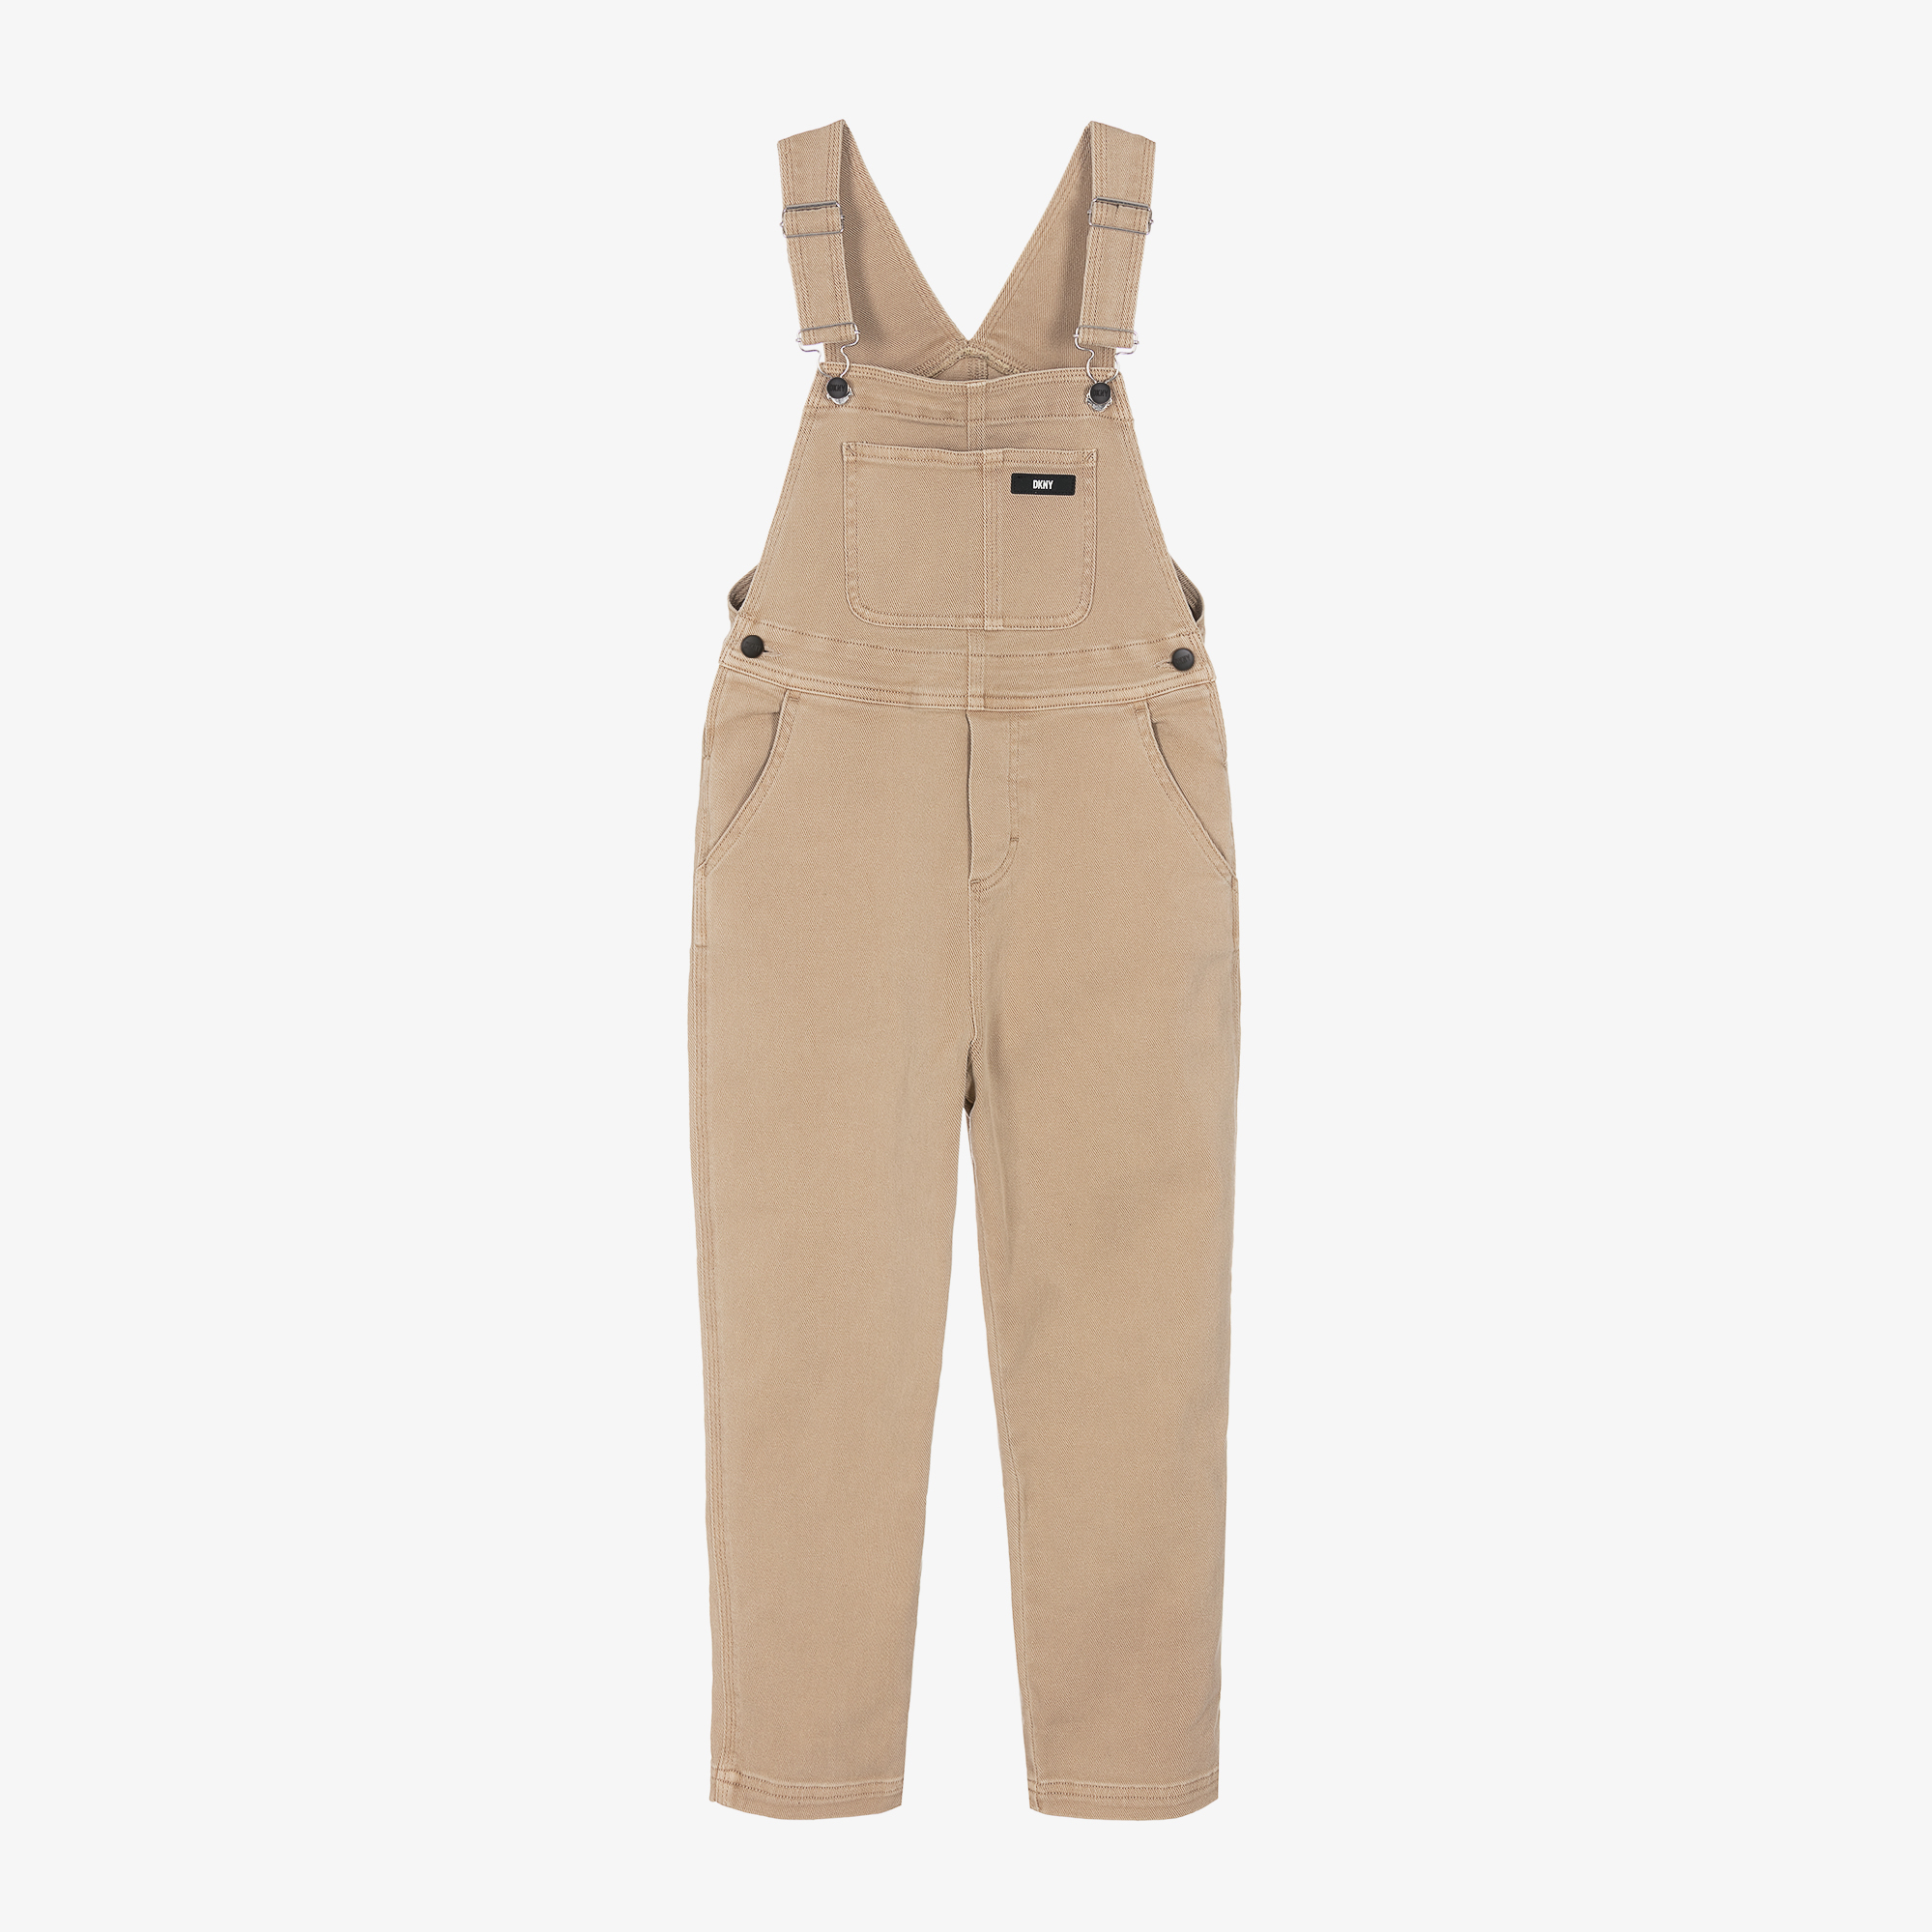 Dkny Kids logo-patch cotton dungarees - White